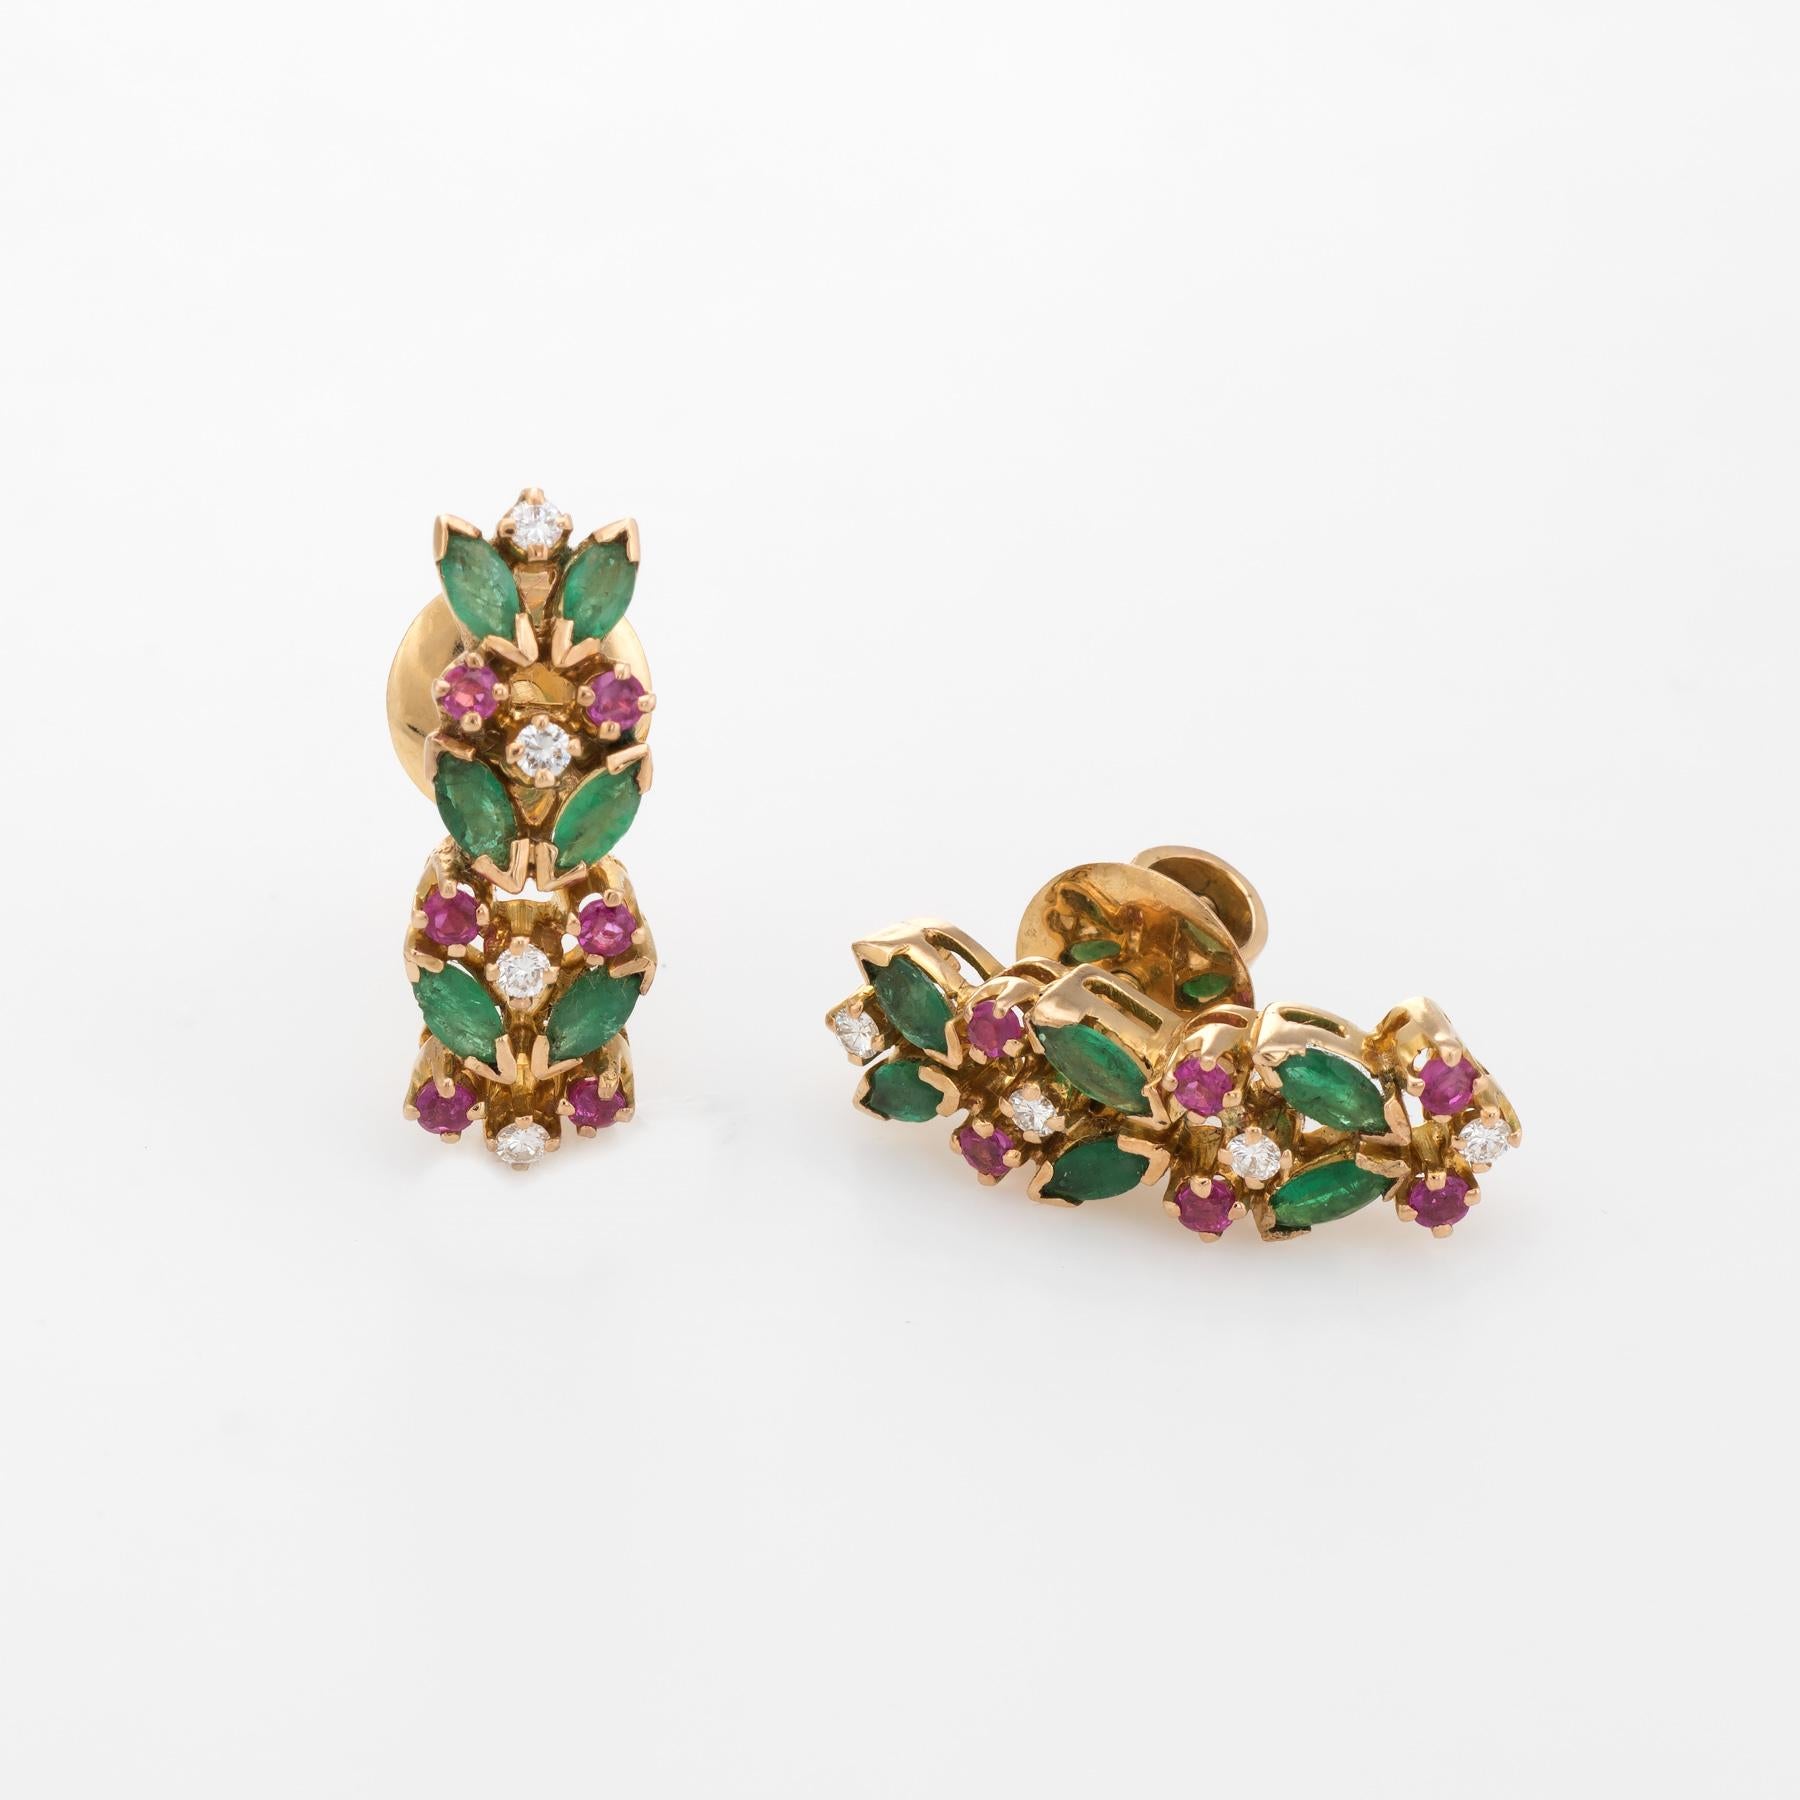 Elegant pair of gemstone shrimp earrings, crafted in 14k yellow gold. 

12 approx. 0.05 carat marquise cut emeralds total an estimated 0.60 carats, accented with 12 approx. 0.01 carat rubies (0.12 carats total estimated weight). The diamonds total